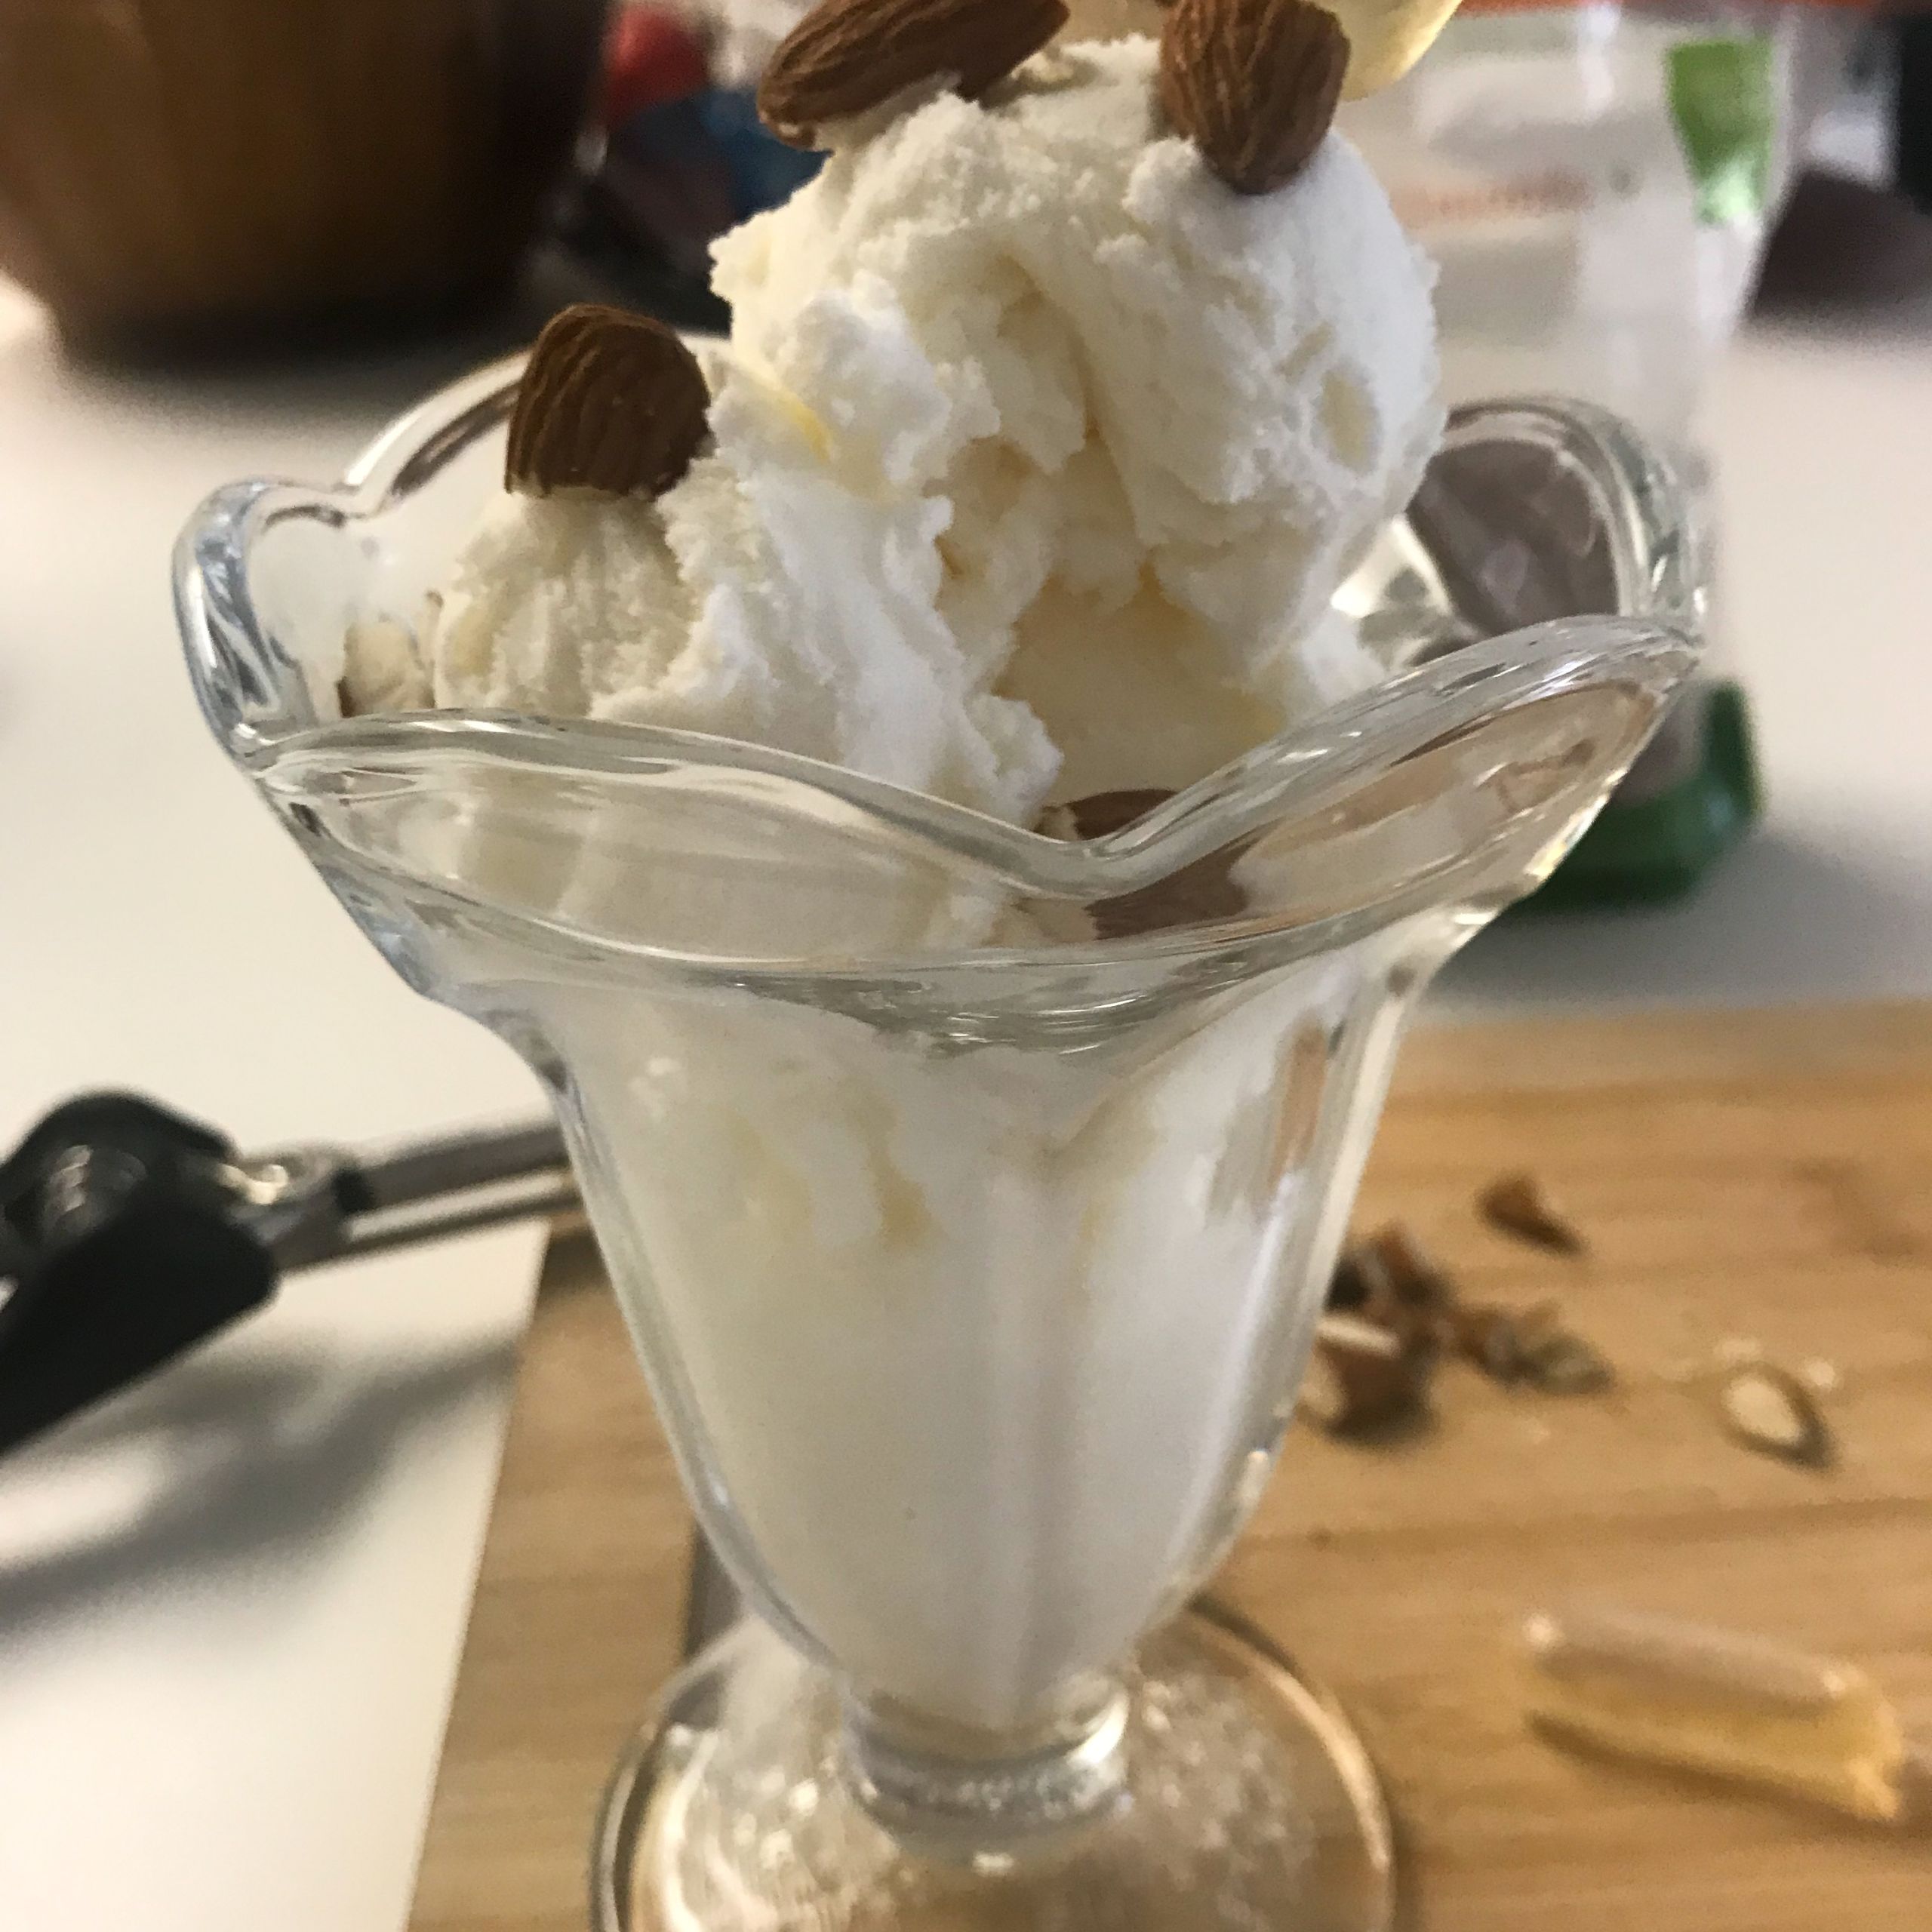 dish of no churn ice cream with nuts